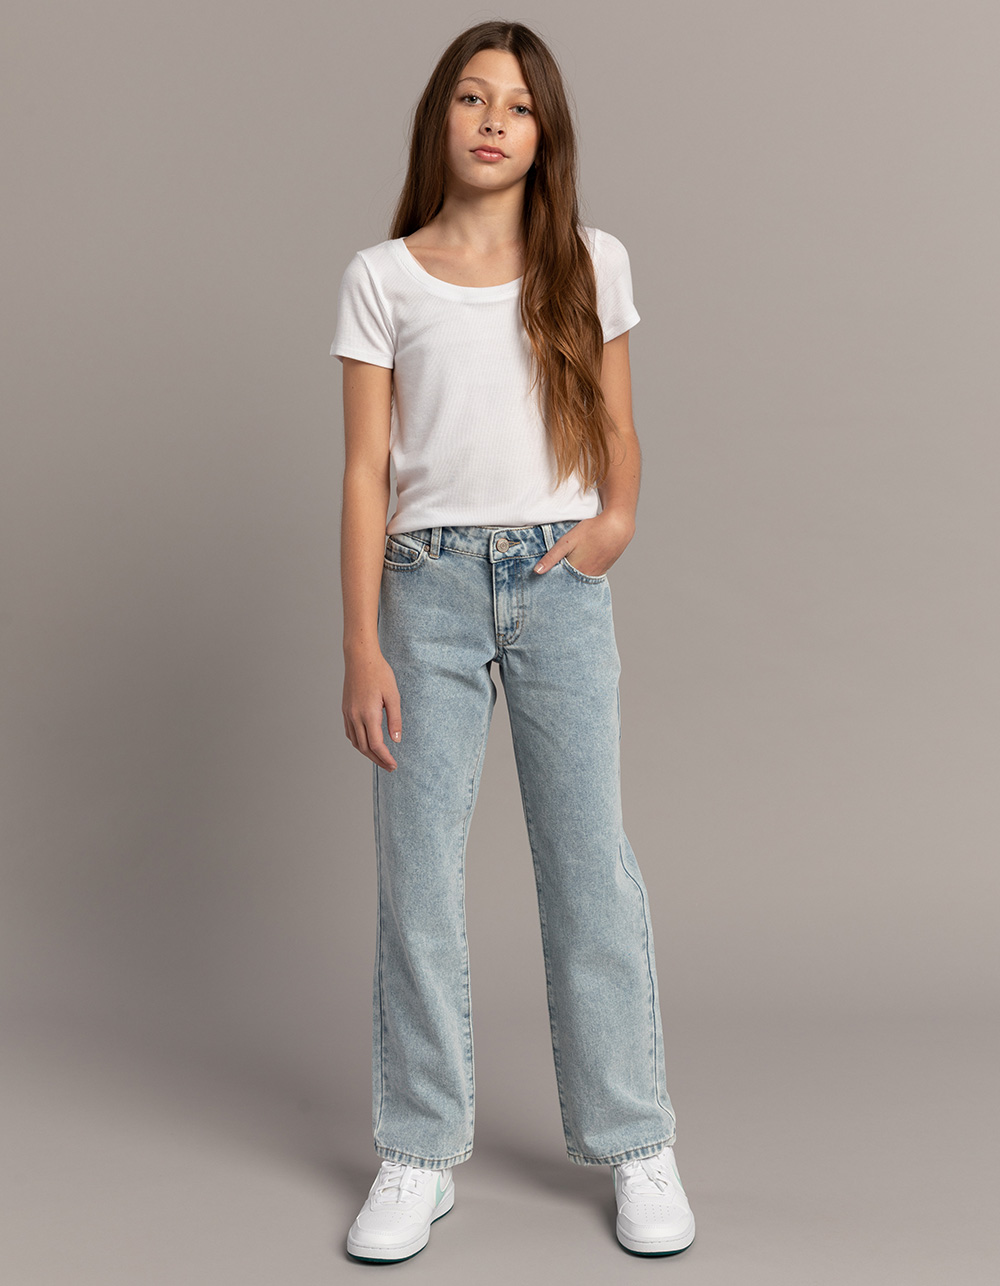 Womens Baggy Jeans for Teen Girls Y2K Pants High Philippines | Ubuy-saigonsouth.com.vn